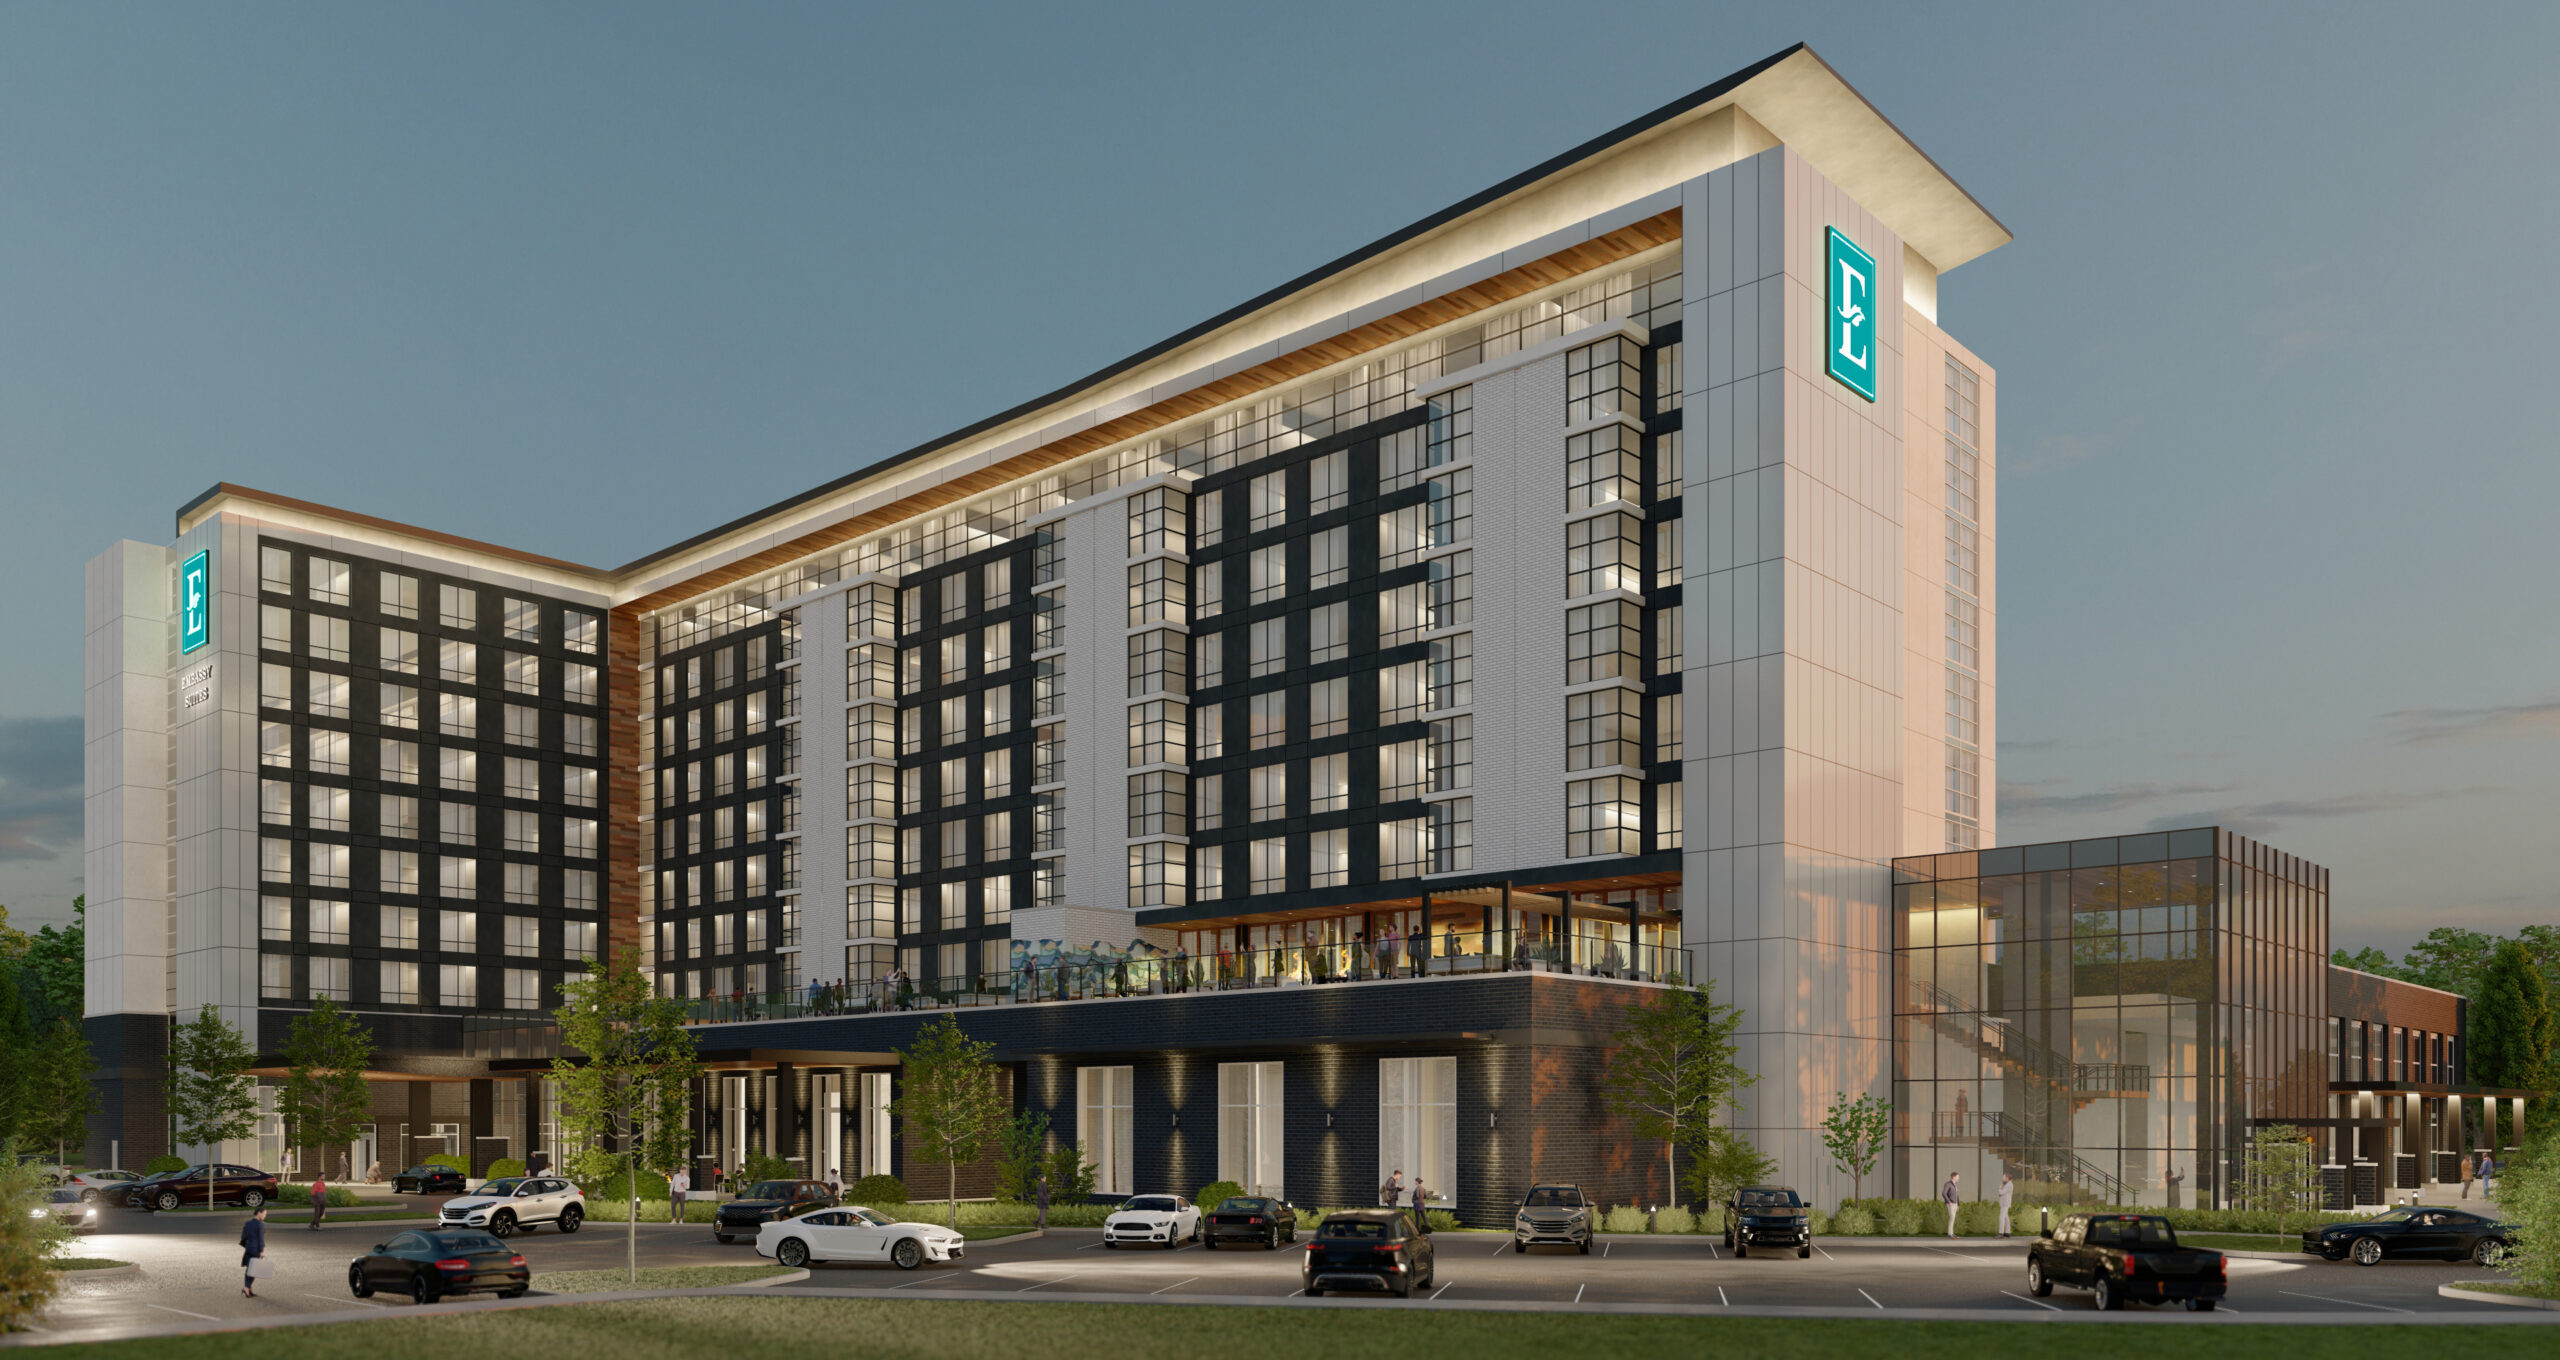 Shamin to build Embassy Suites hotel in Chesterfield